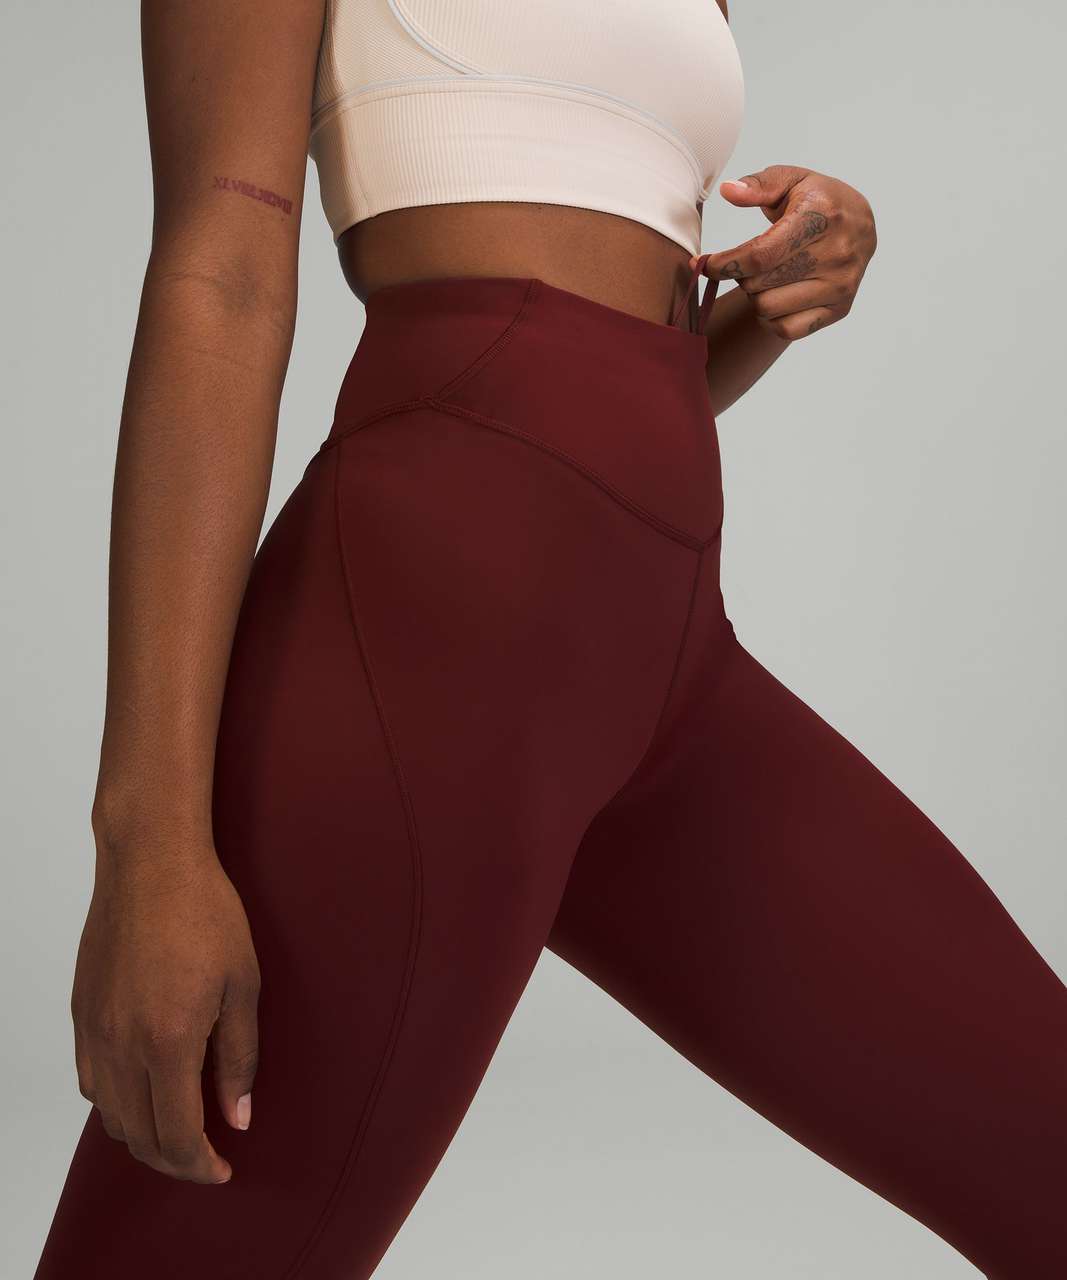 Lululemon Base Pace High Rise Tight Red Merlot Leggings 14 Nwt - $98 New  With Tags - From Marie